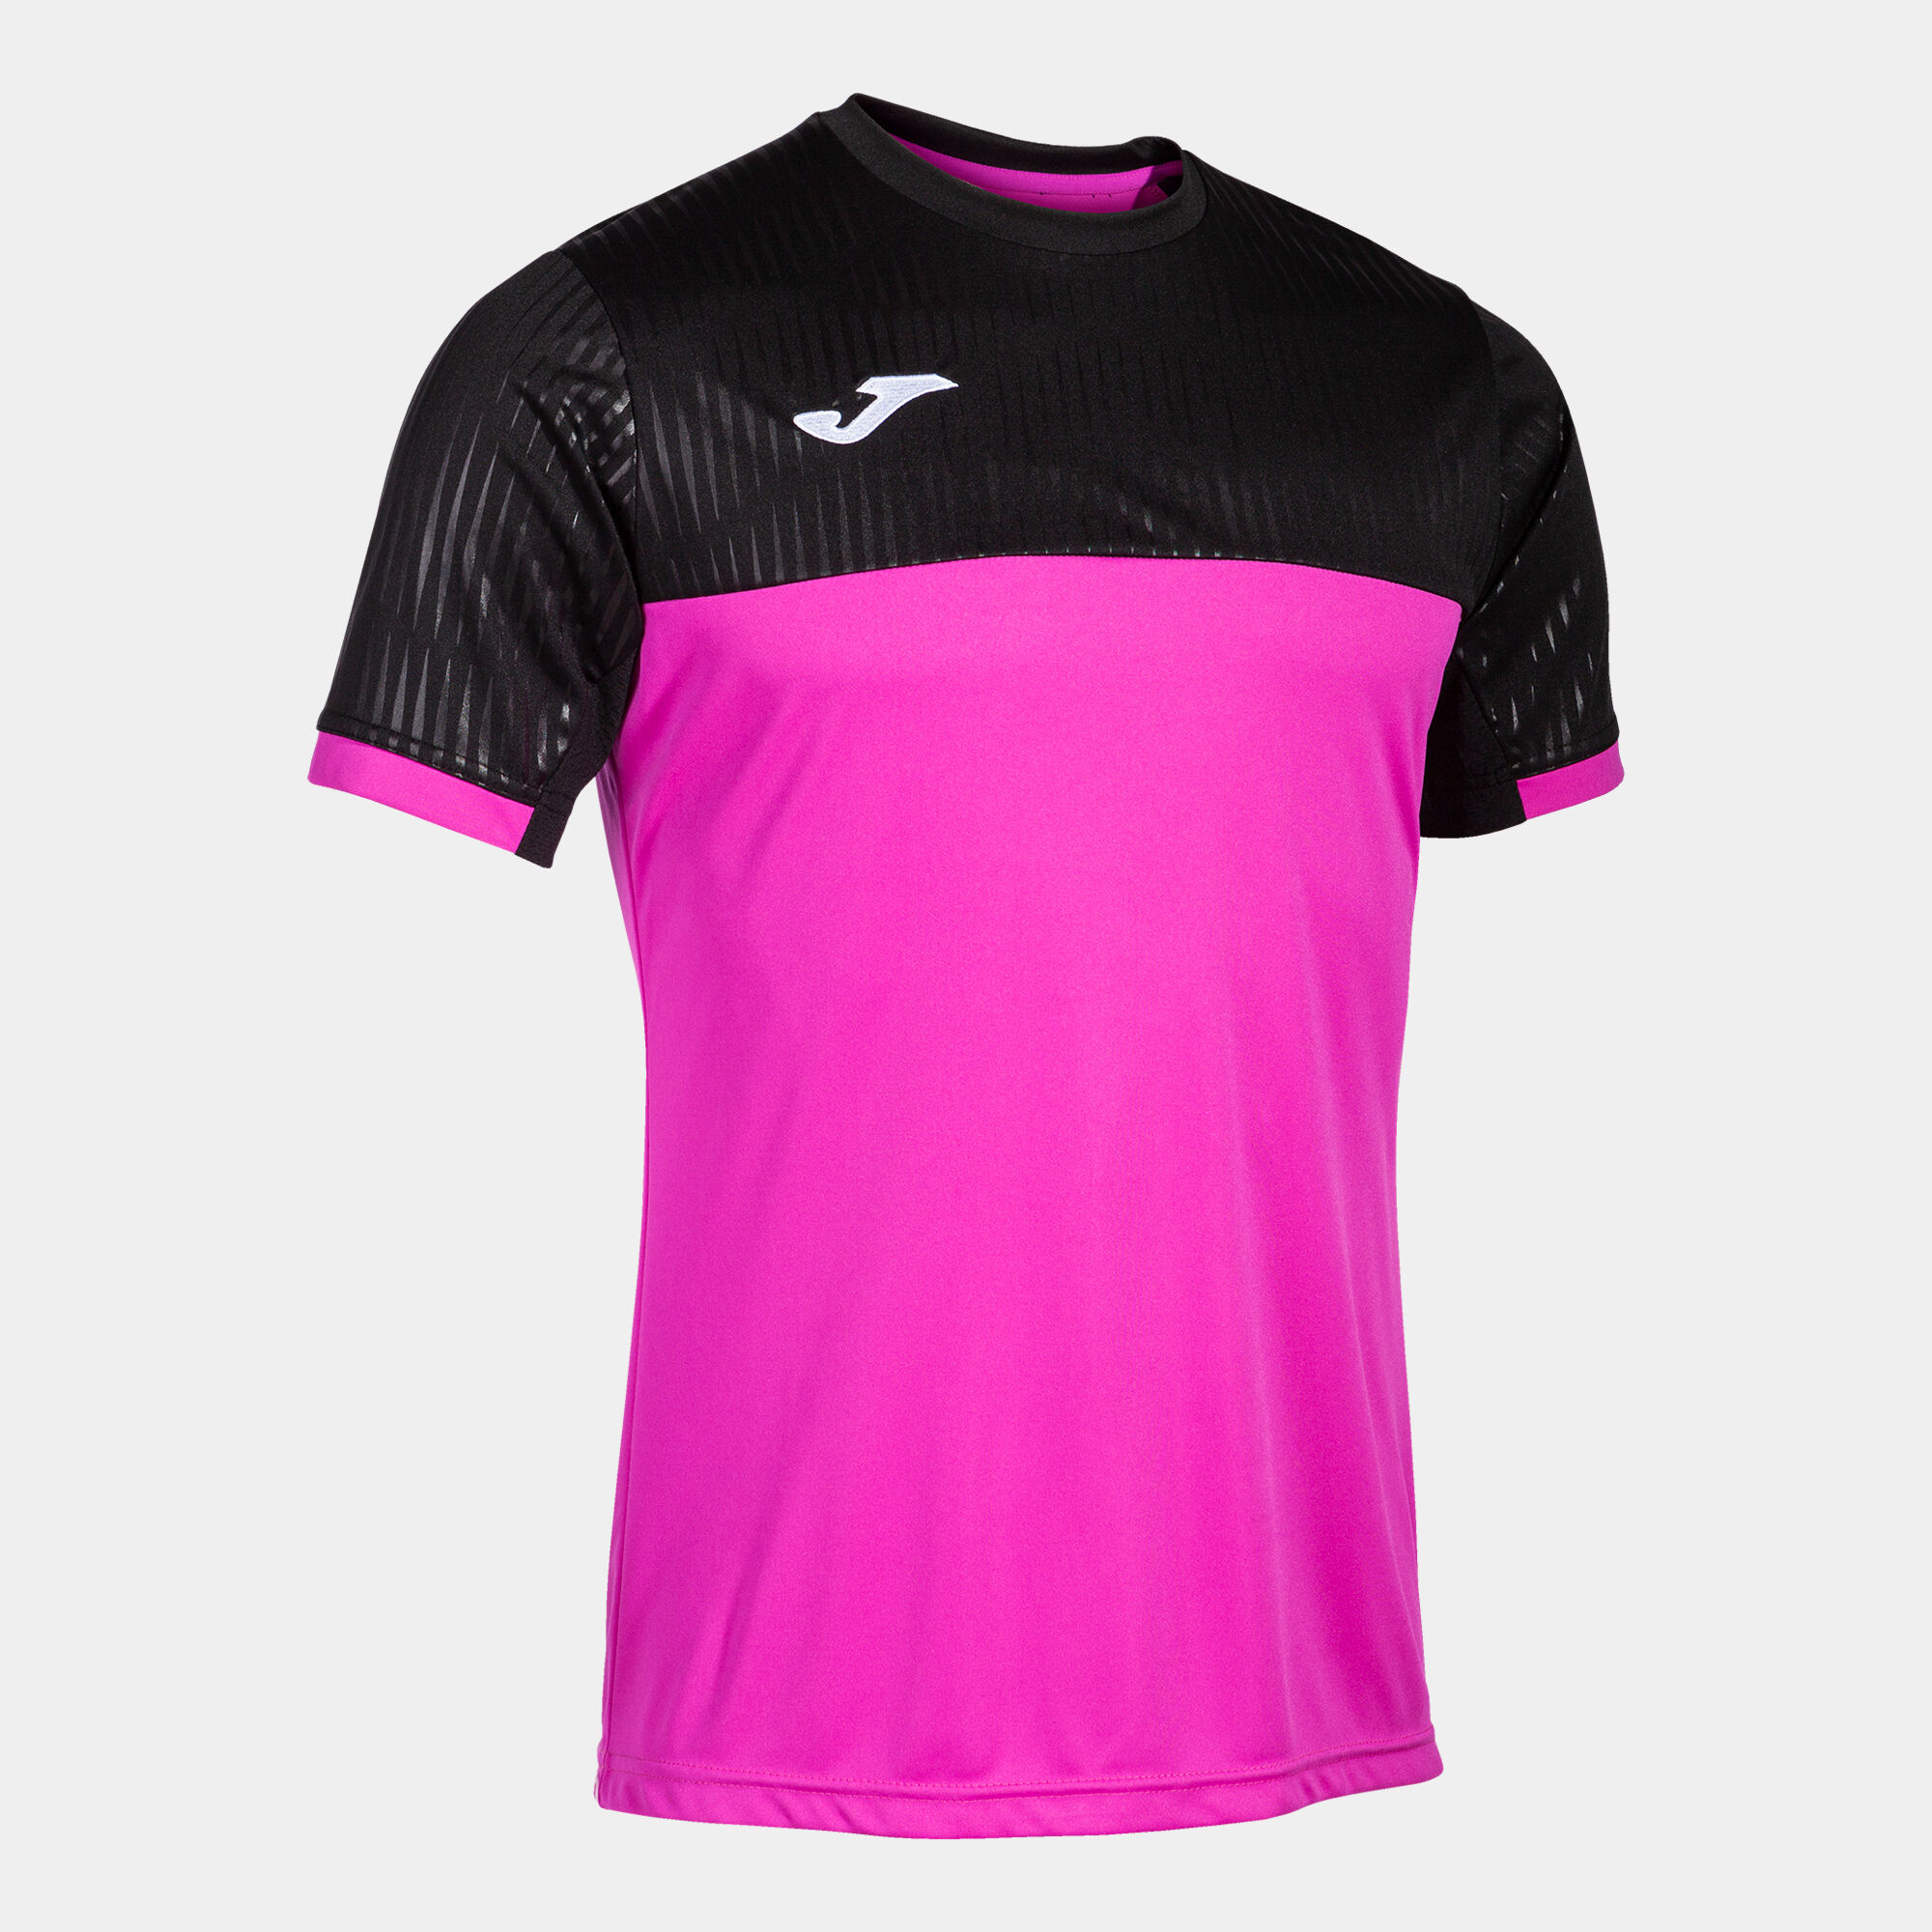 Maillot manches courtes homme Montreal rose fluo noir